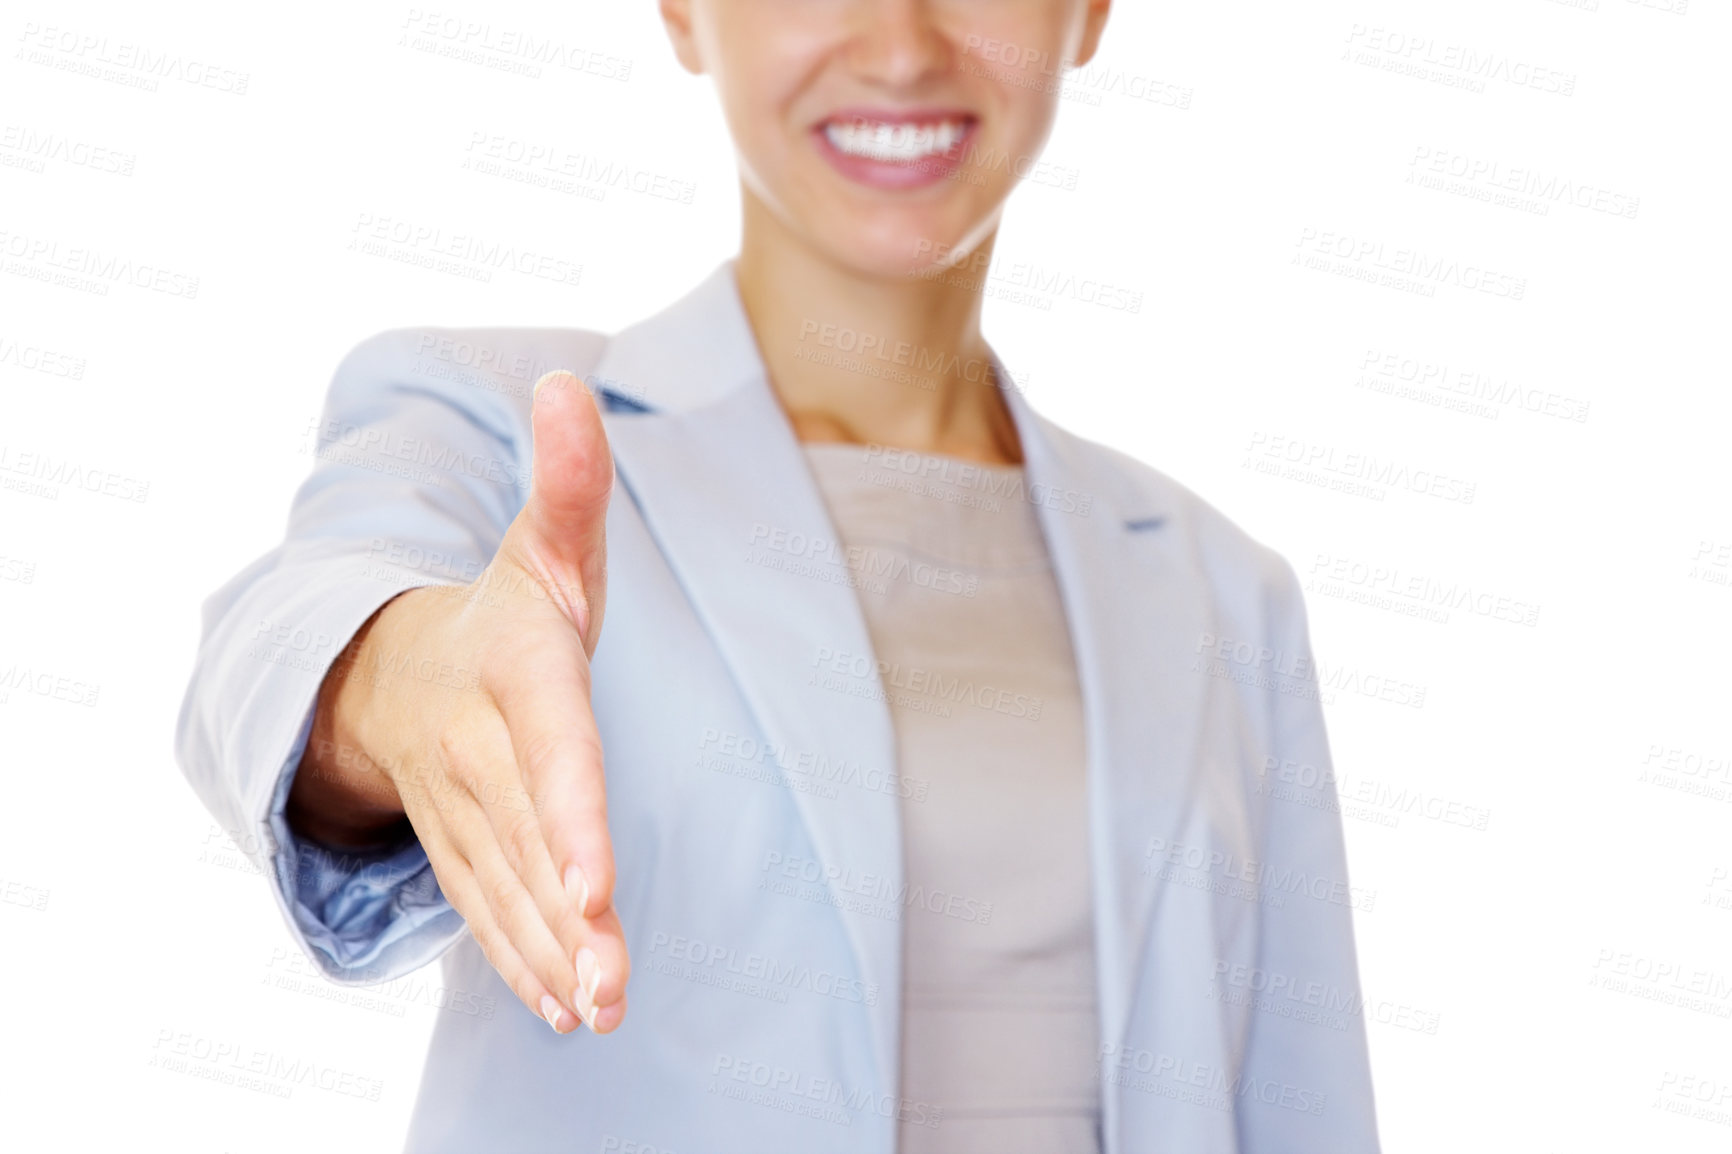 Buy stock photo Cropped image of a business woman offering a handshake against white background